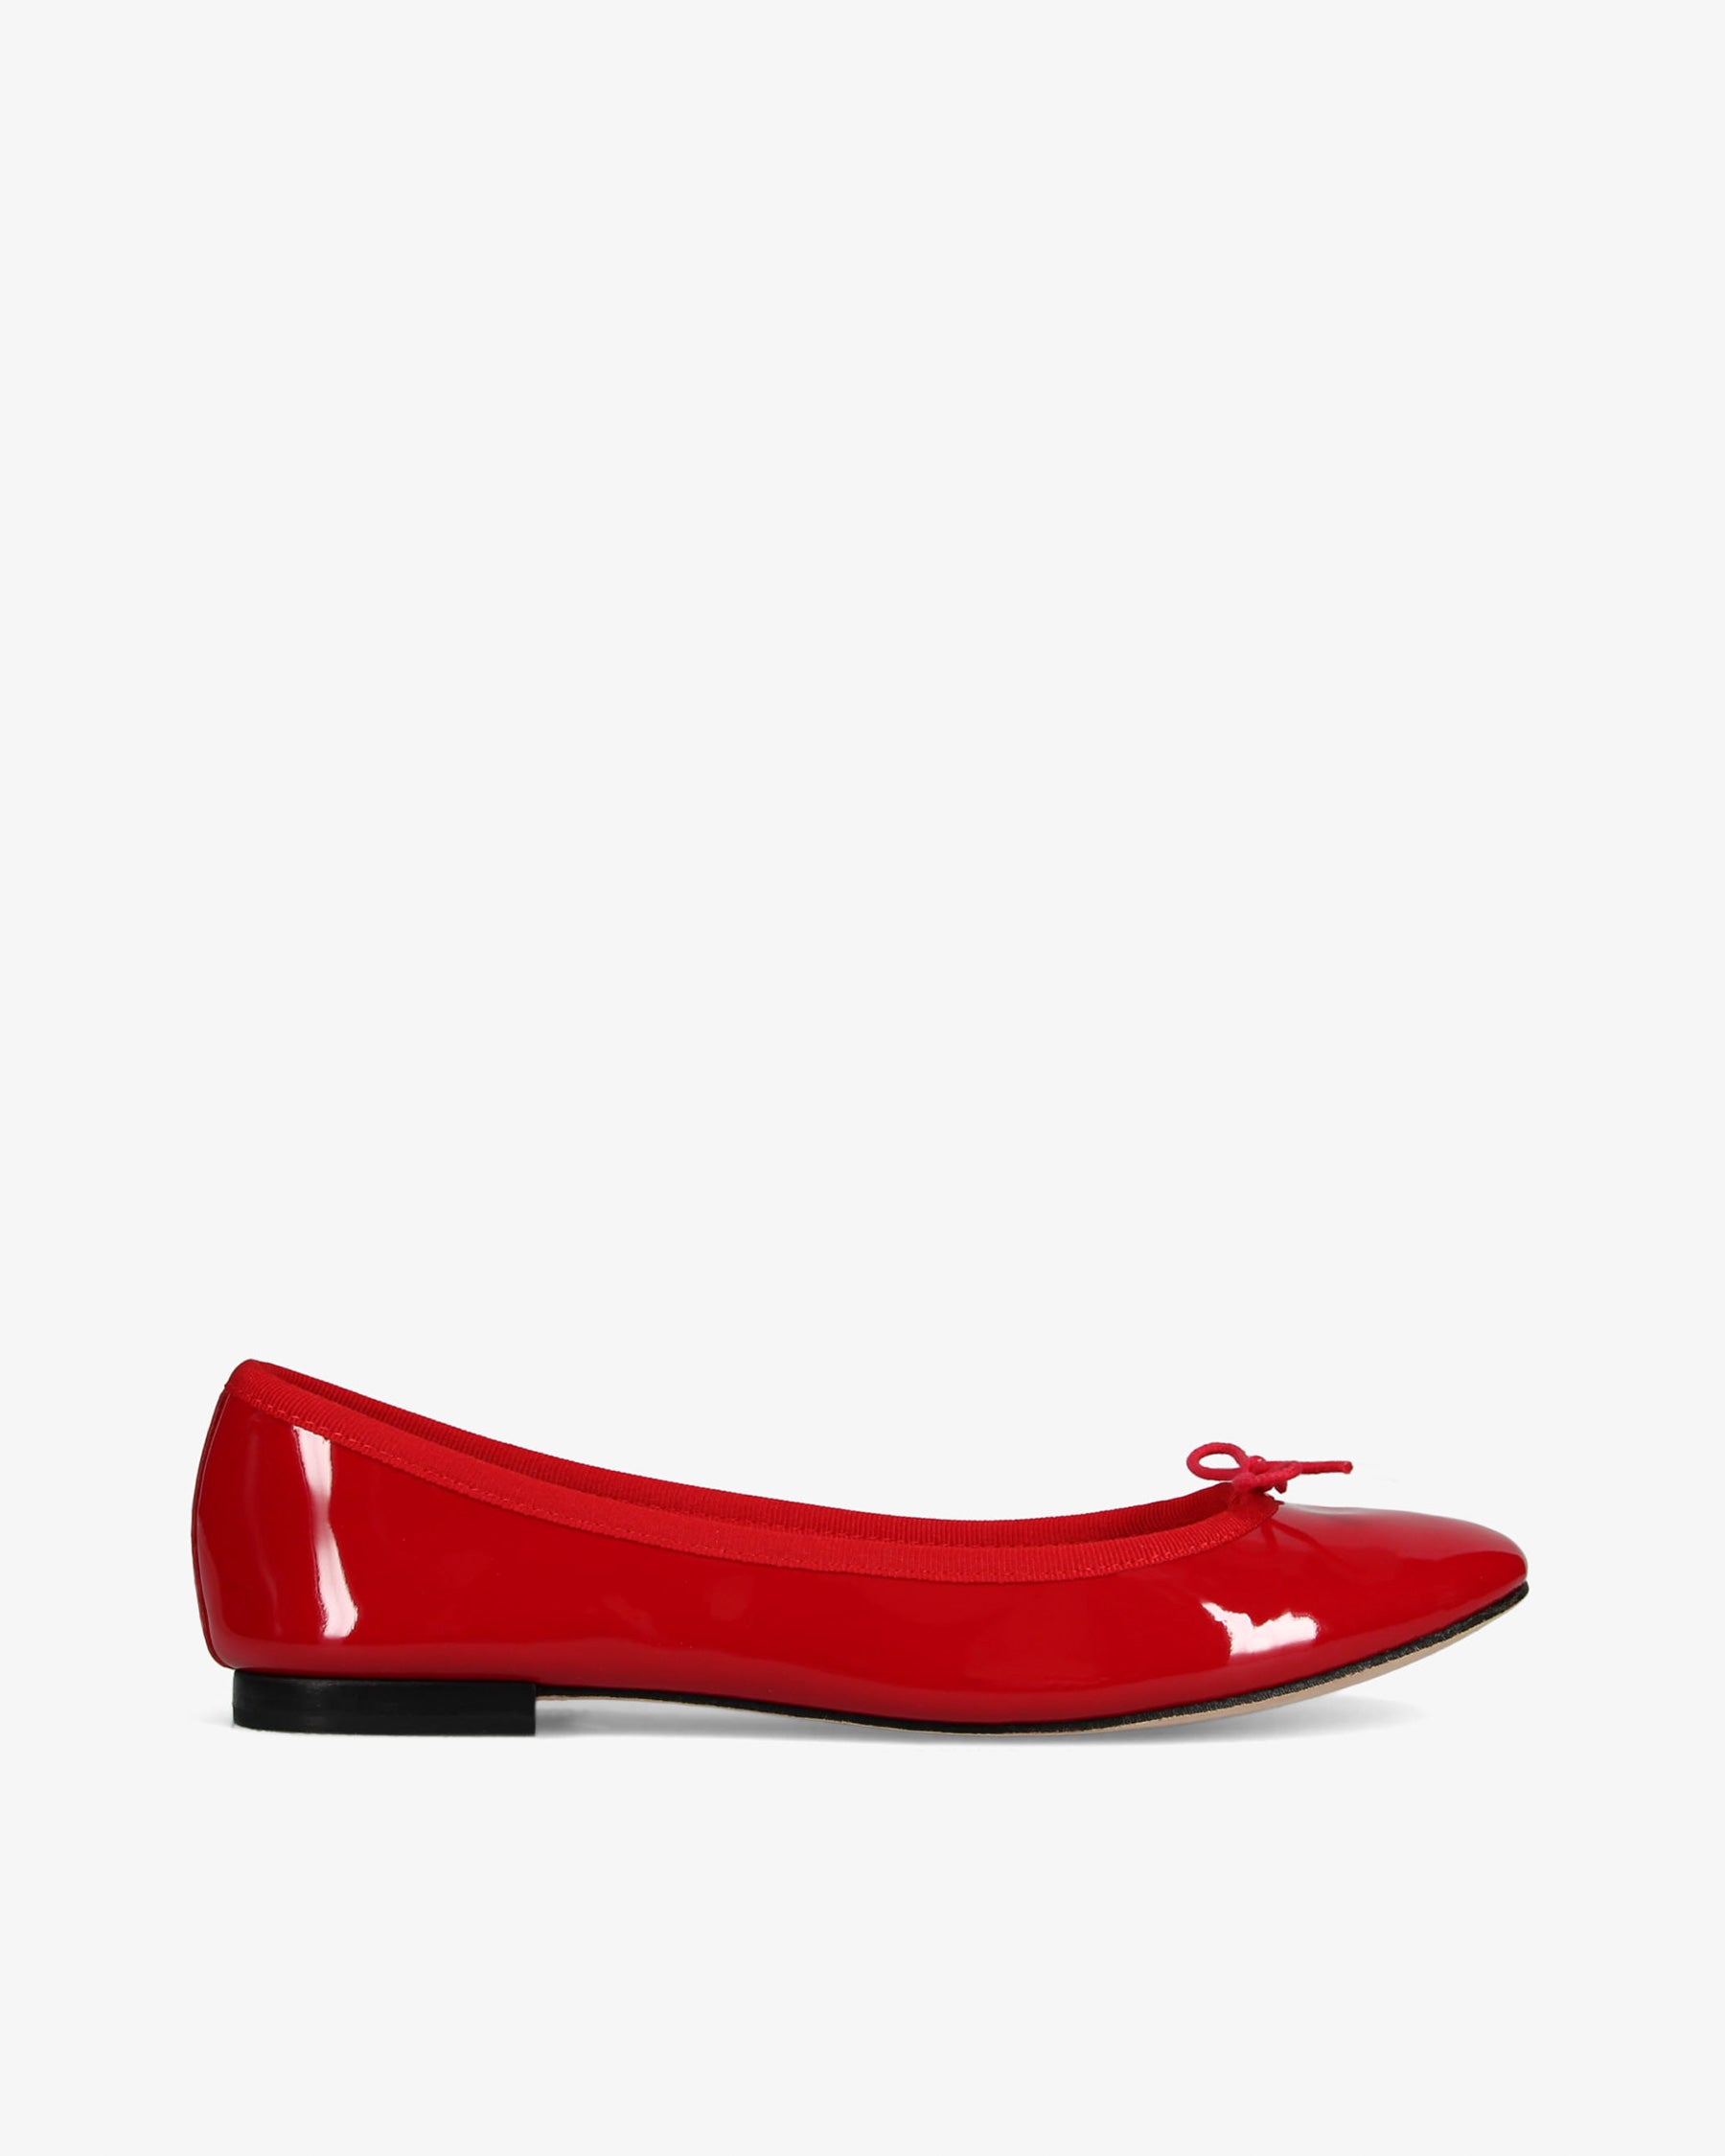 Camille ballerinas in flame red leather – Repetto